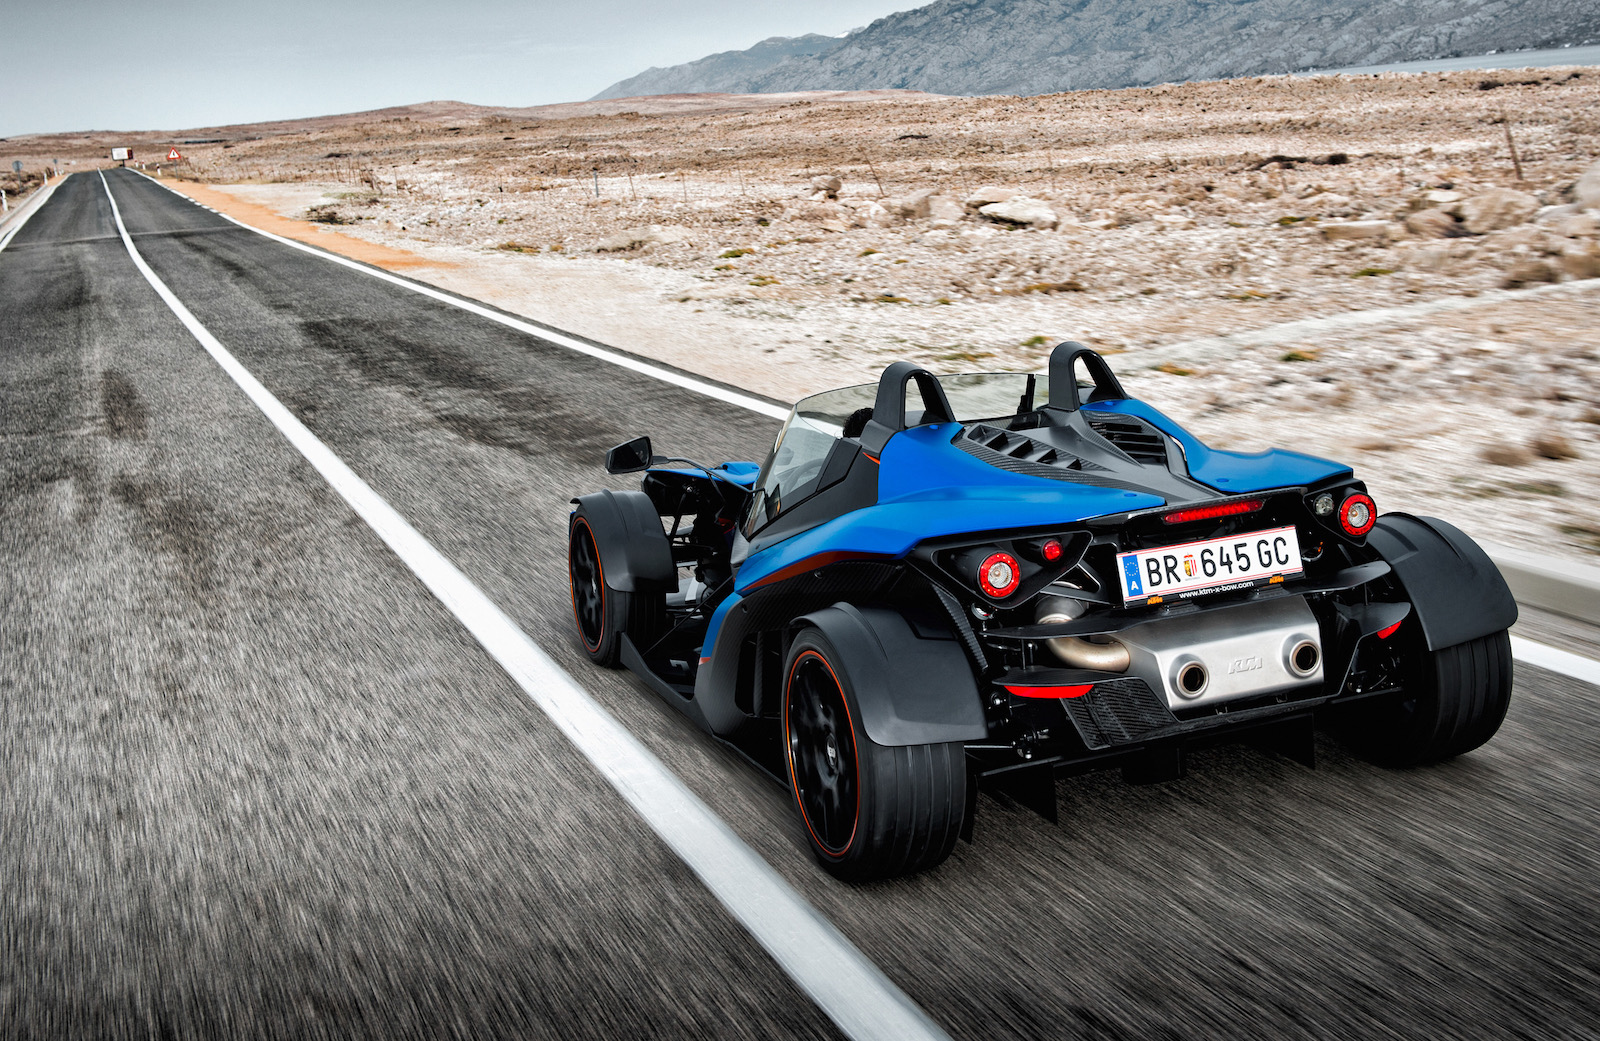 KTM X-Bow GT now available in Australia, adds windscreen - PerformanceDrive